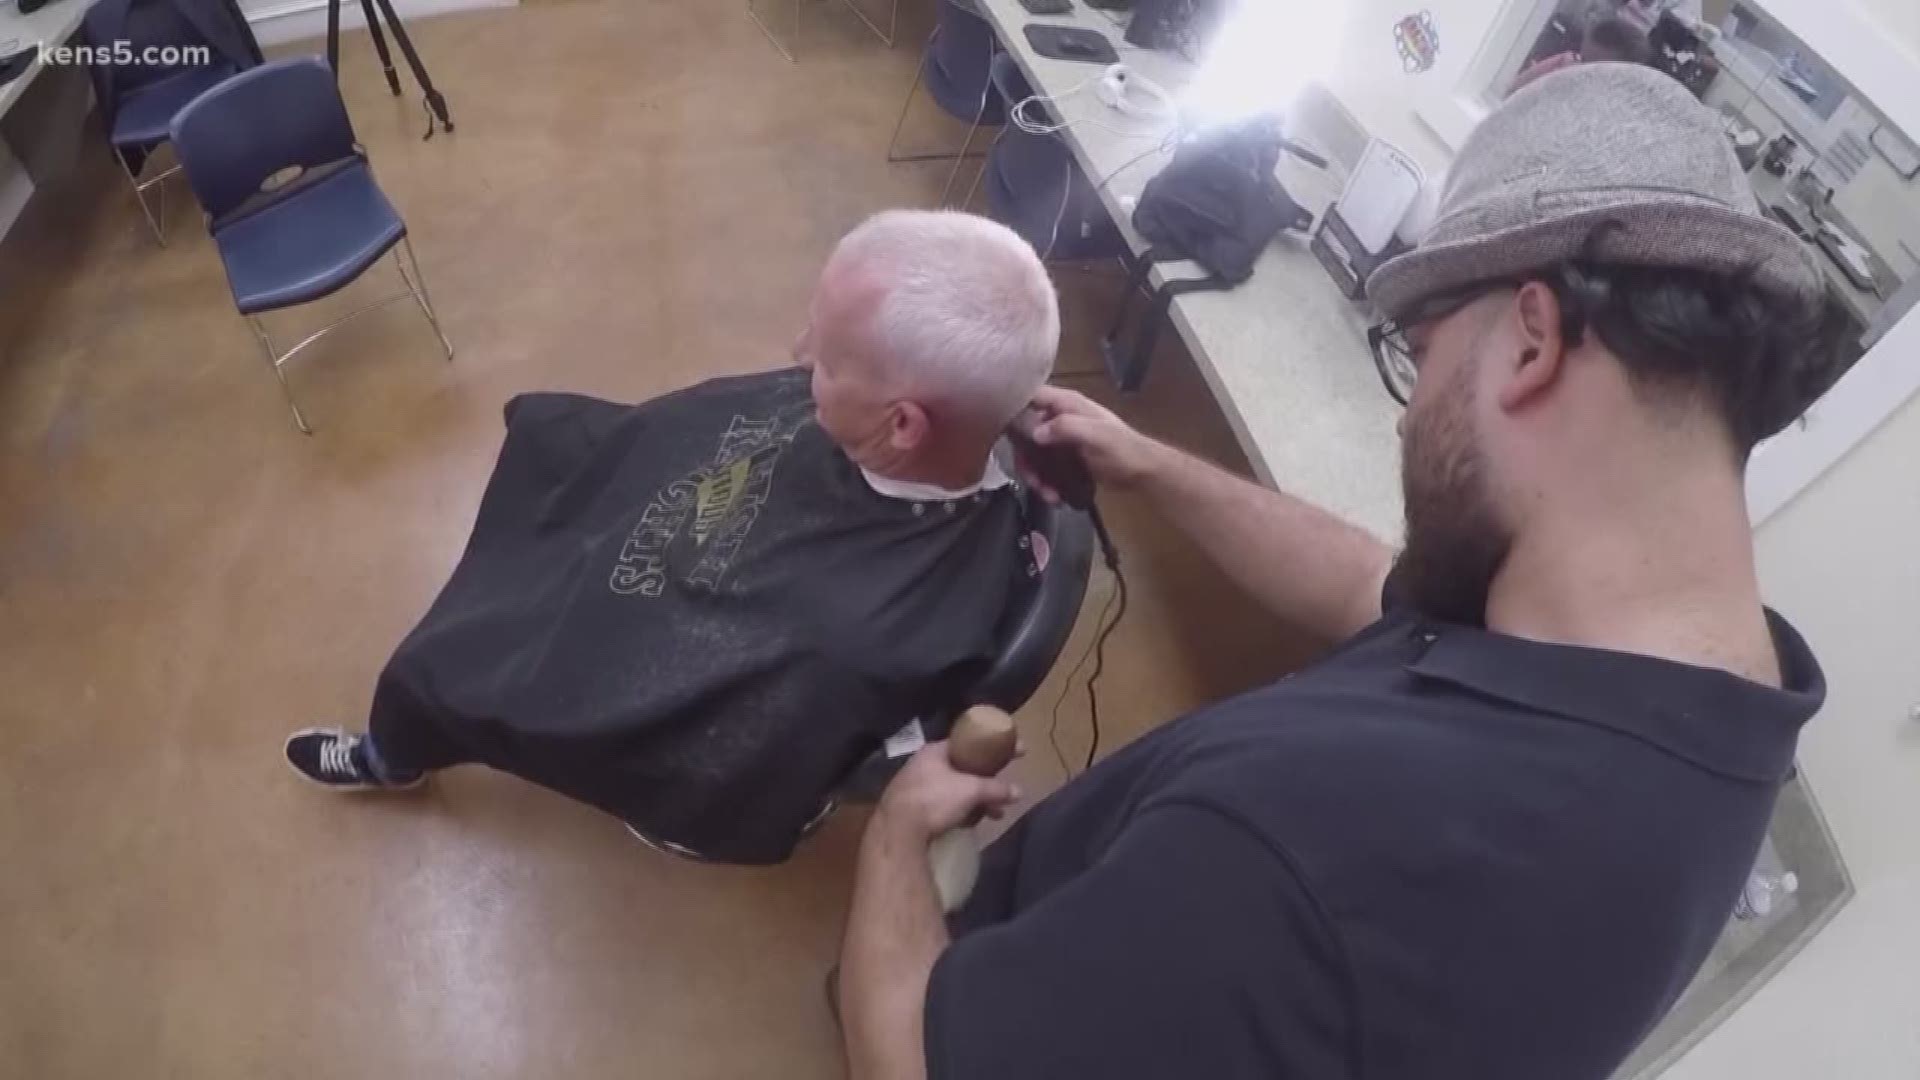 A local barber is donating his time and skill to give area veterans a boost of confidence.